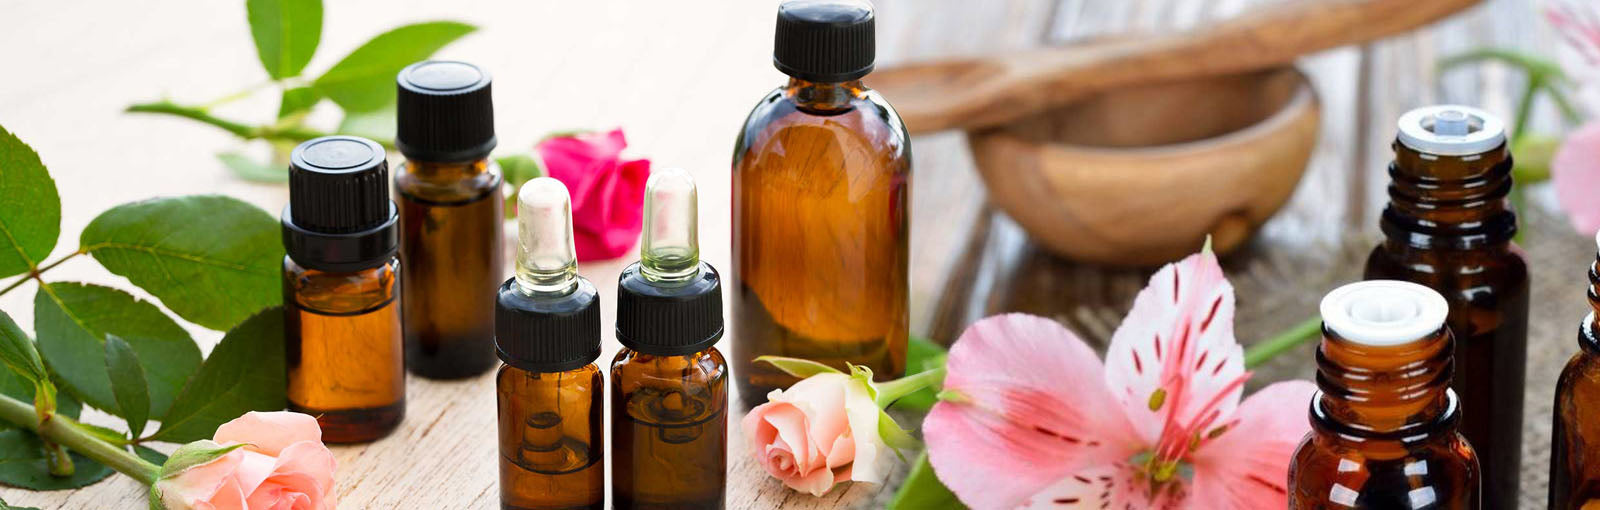 common kinds of essential oils and their uses